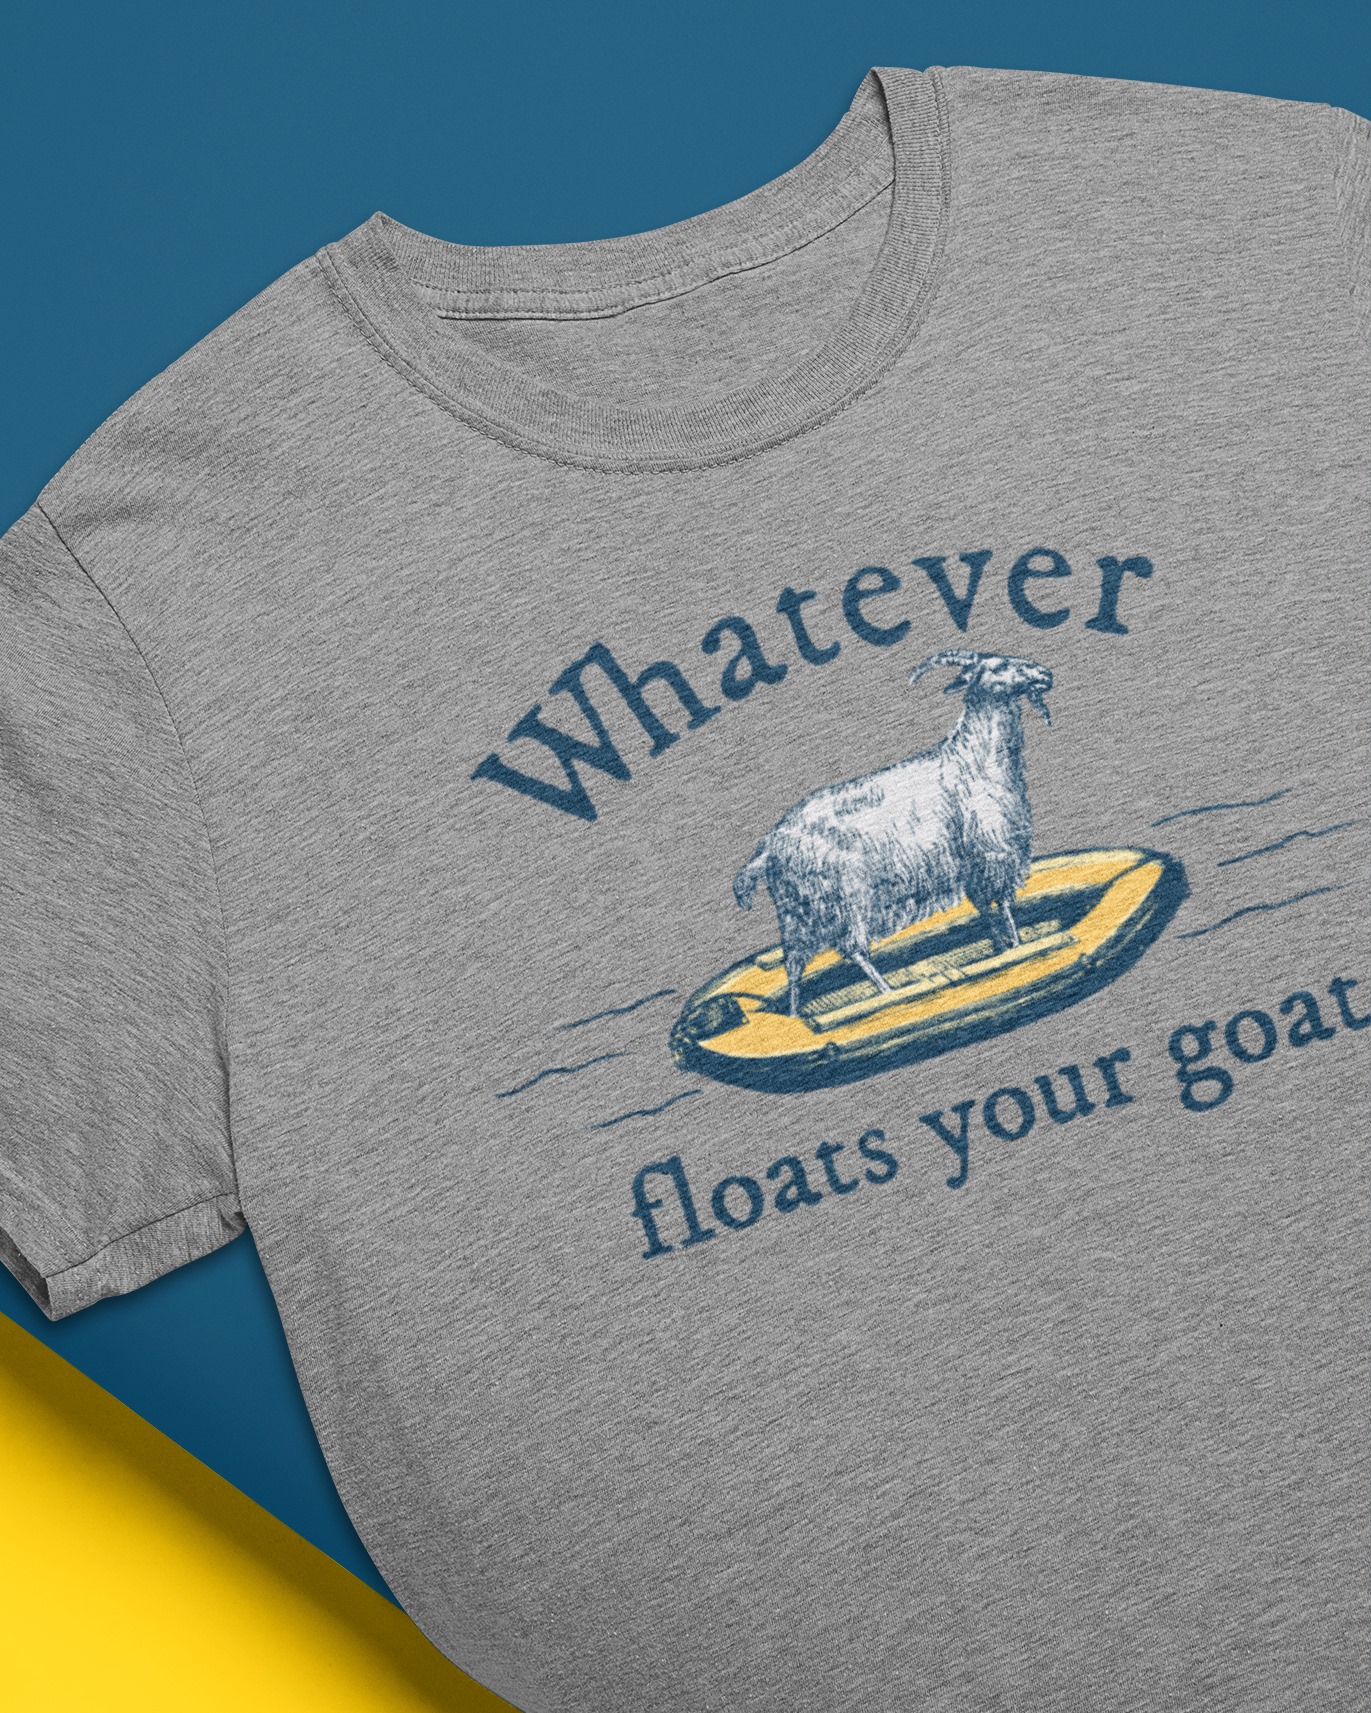 Whatever floats your goat - Goat lover